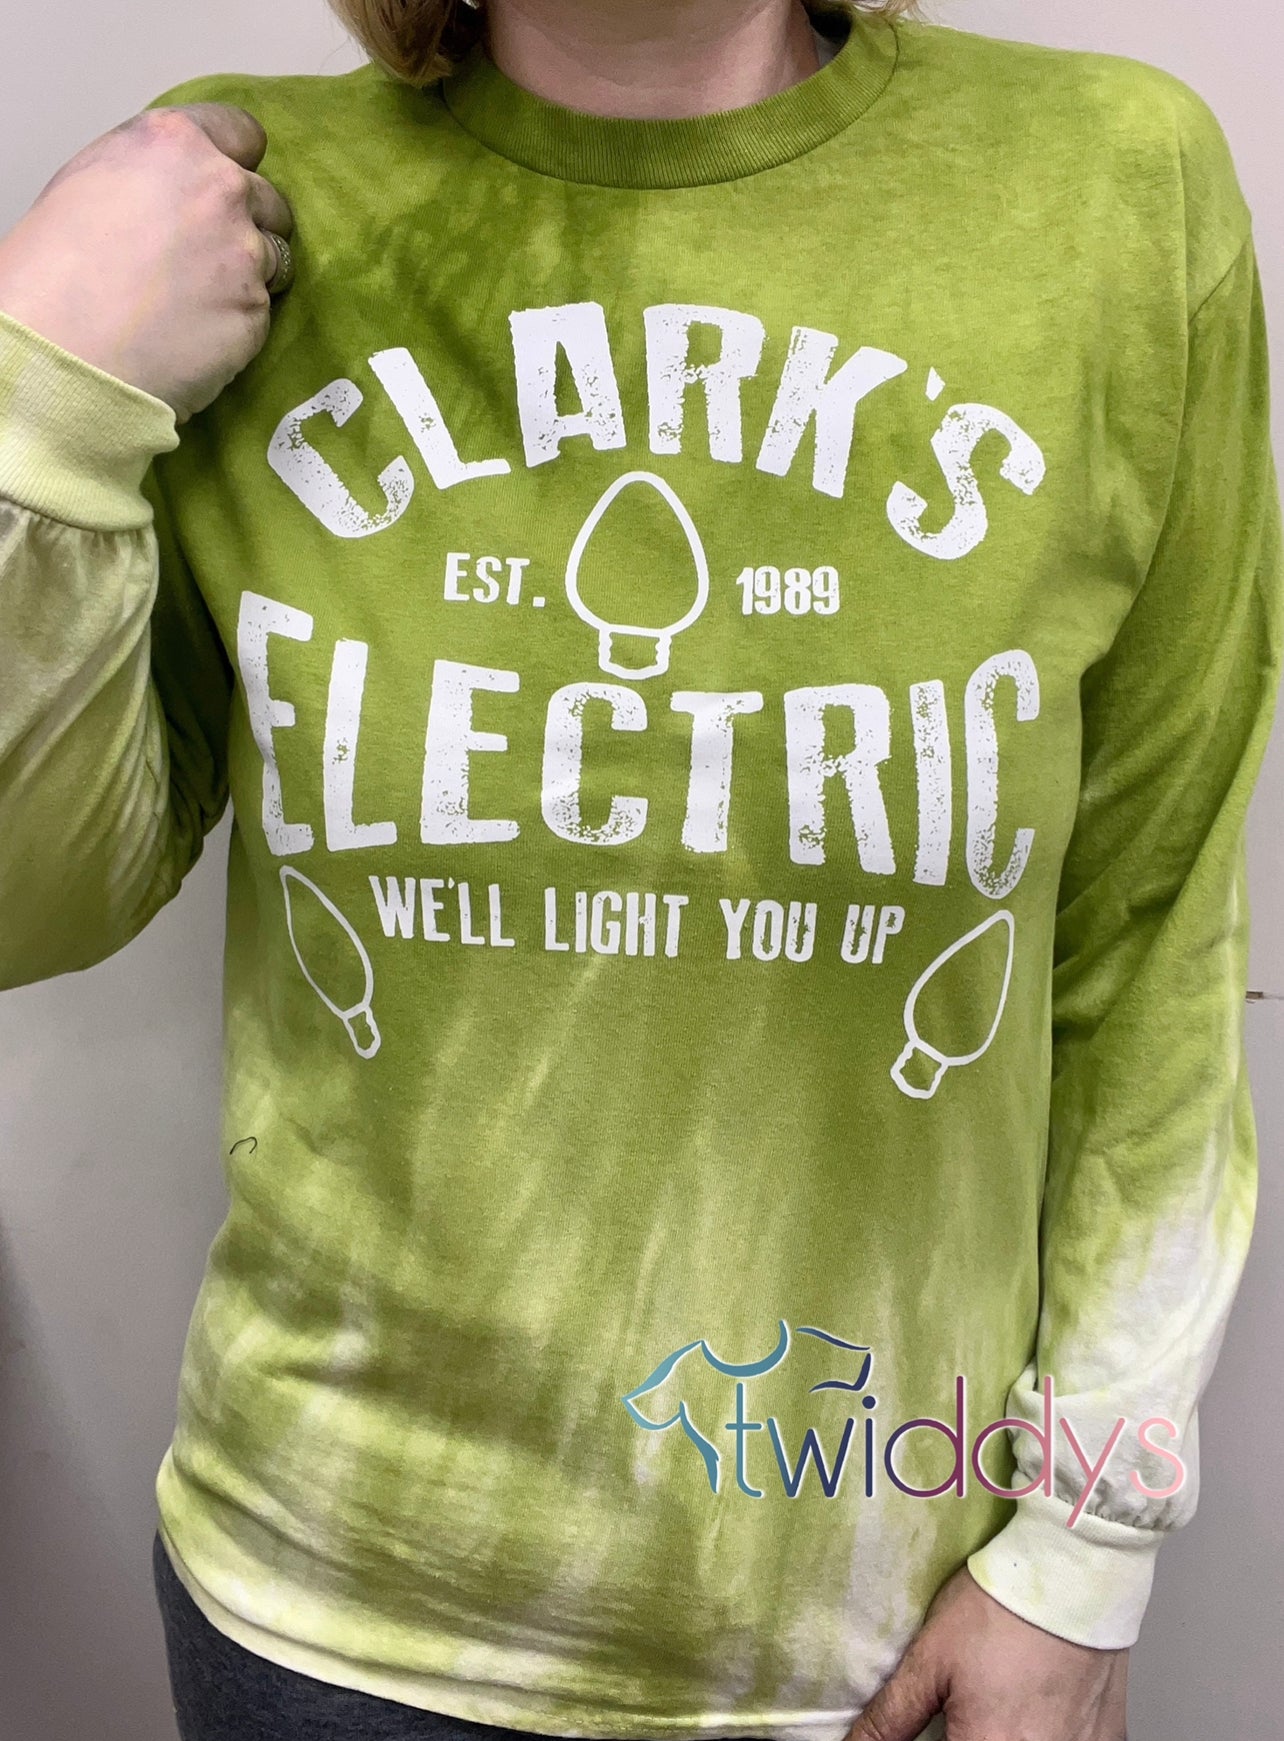 Clarks Electric Dyed Tee